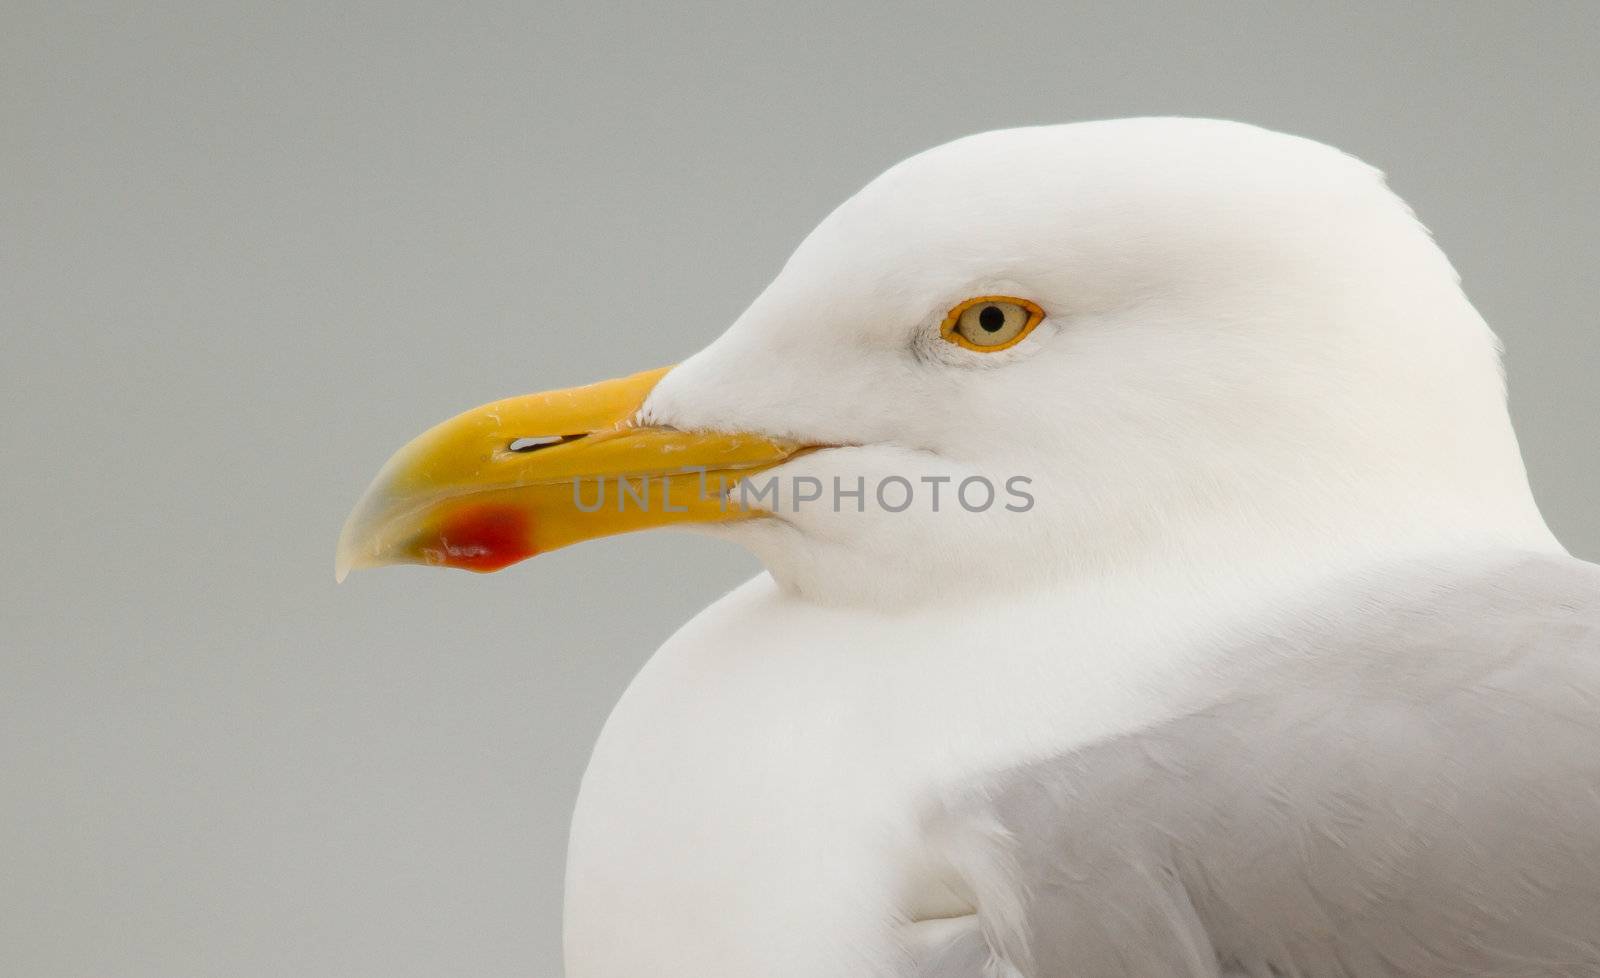 A close-up of a Herring Gull in Helgoland